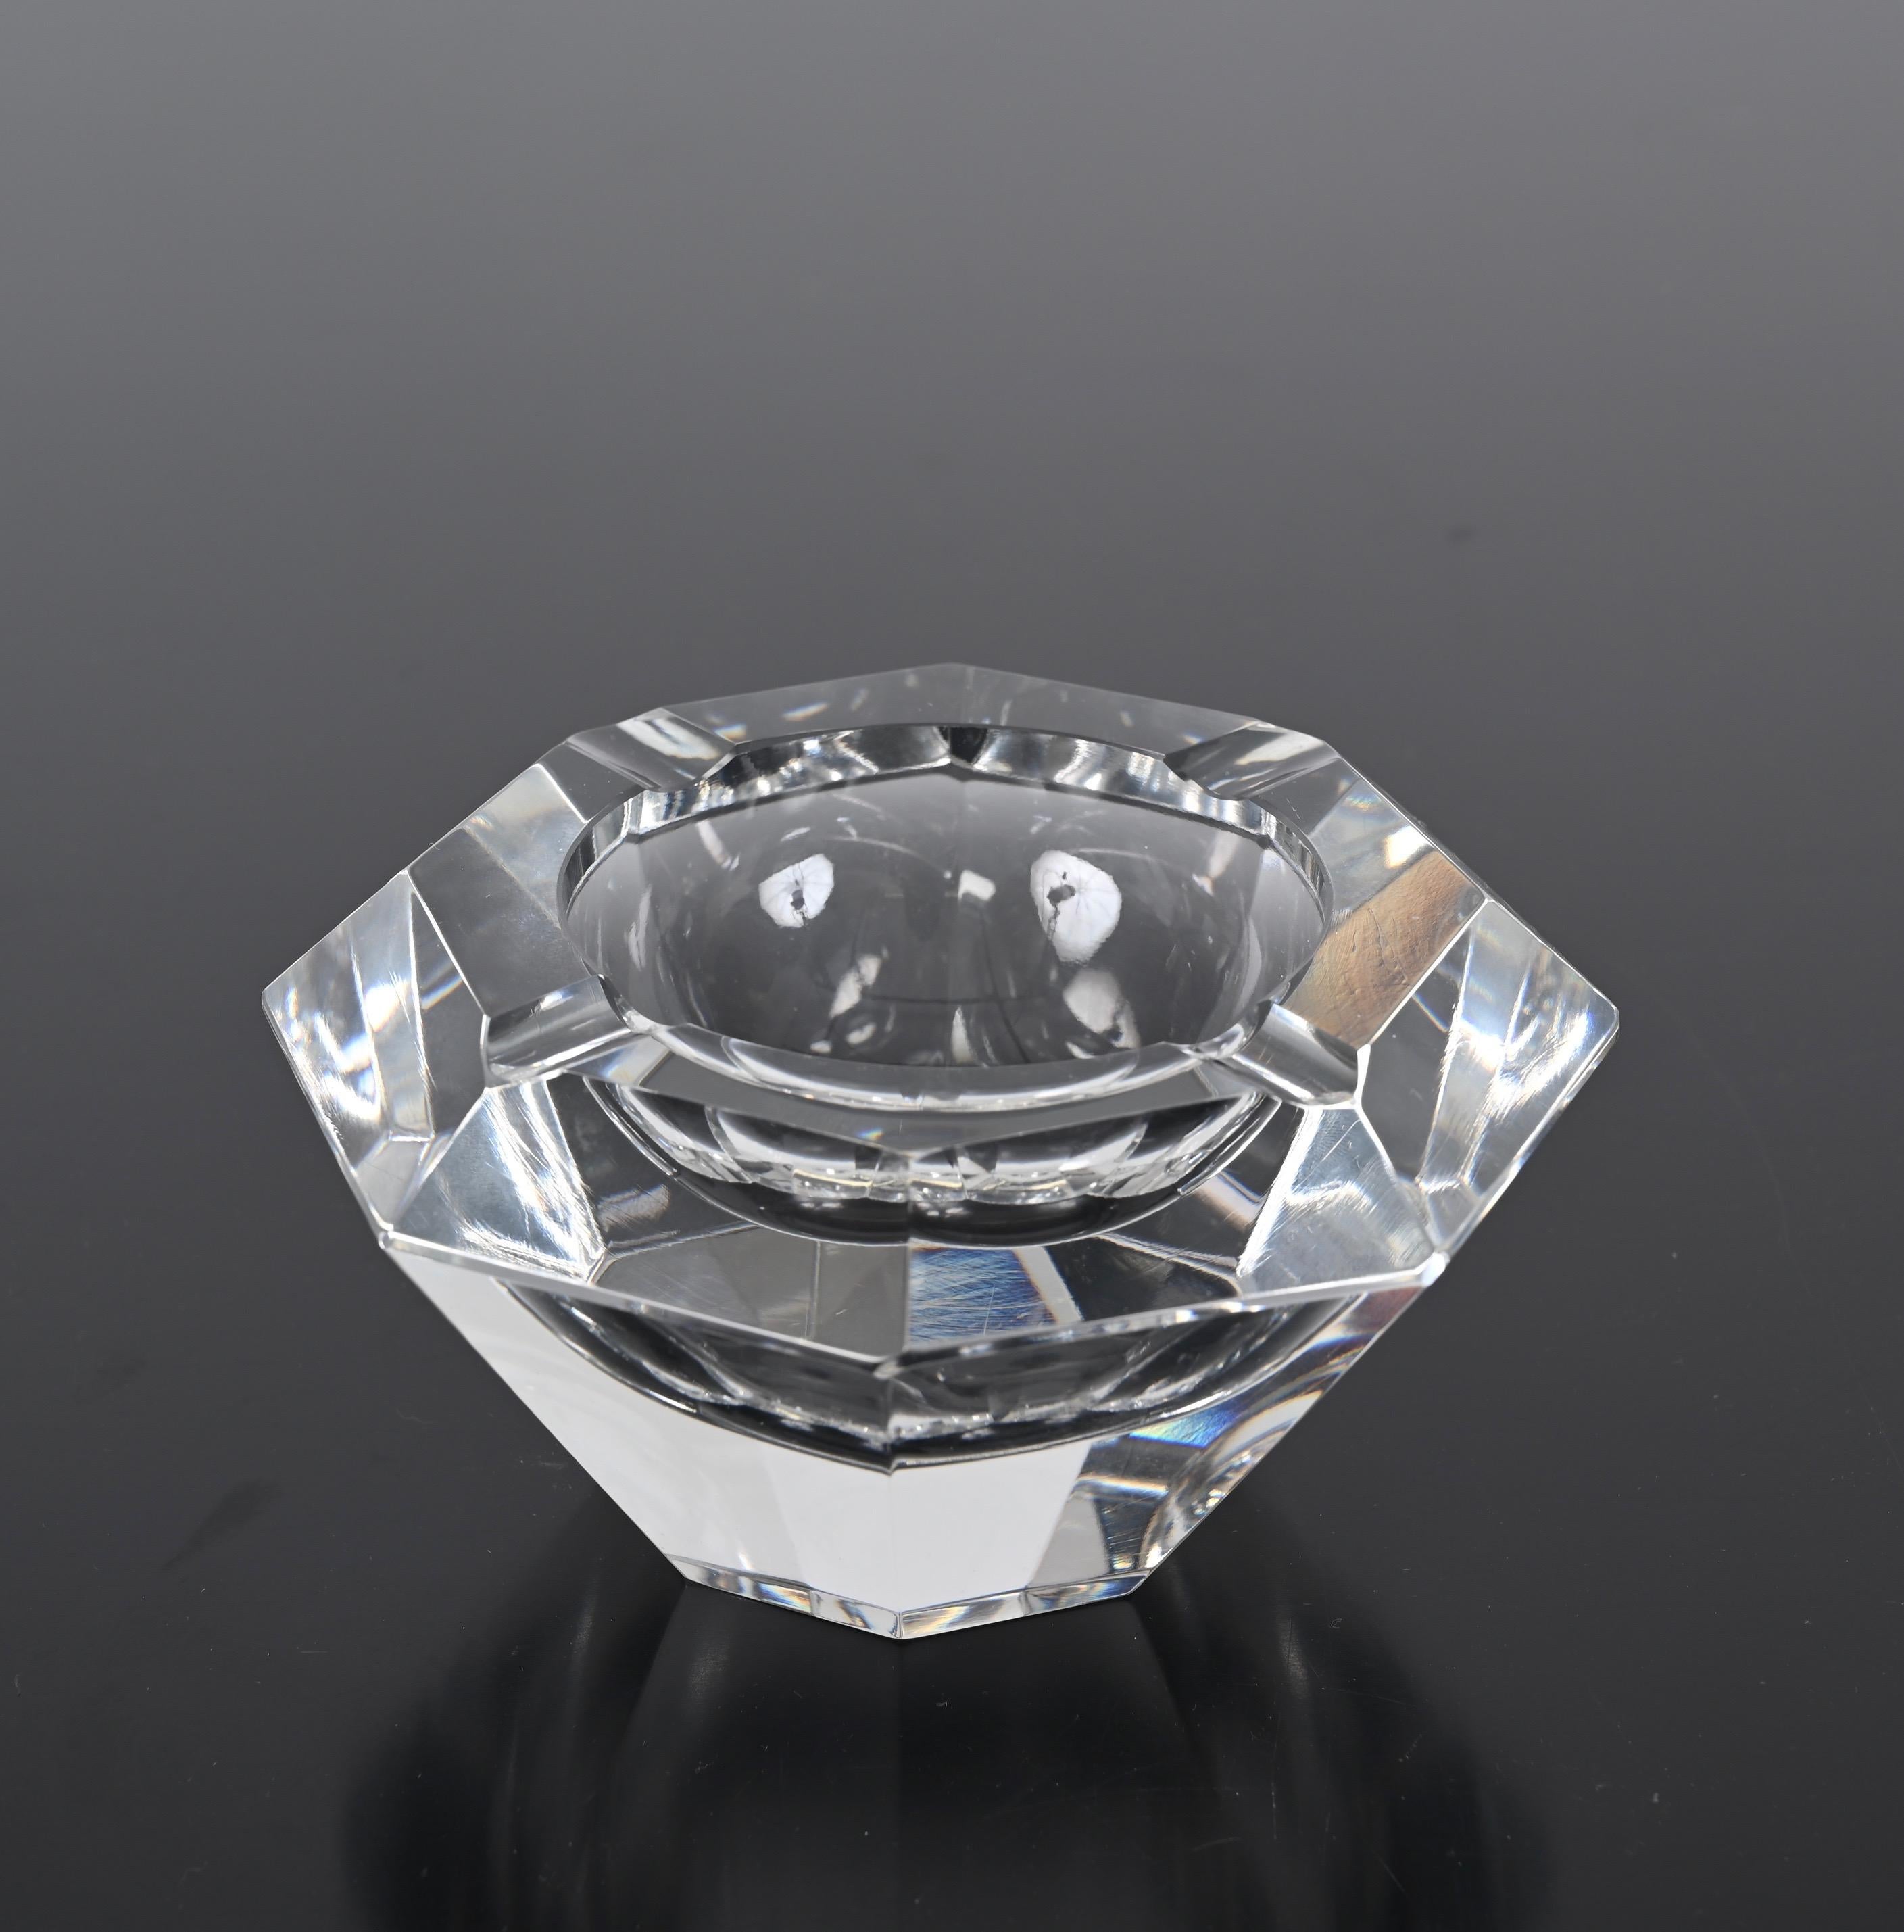 Giant Flavio Poli Bowl in Faceted Murano Glass in the Shape of a Diamond, Italy For Sale 5